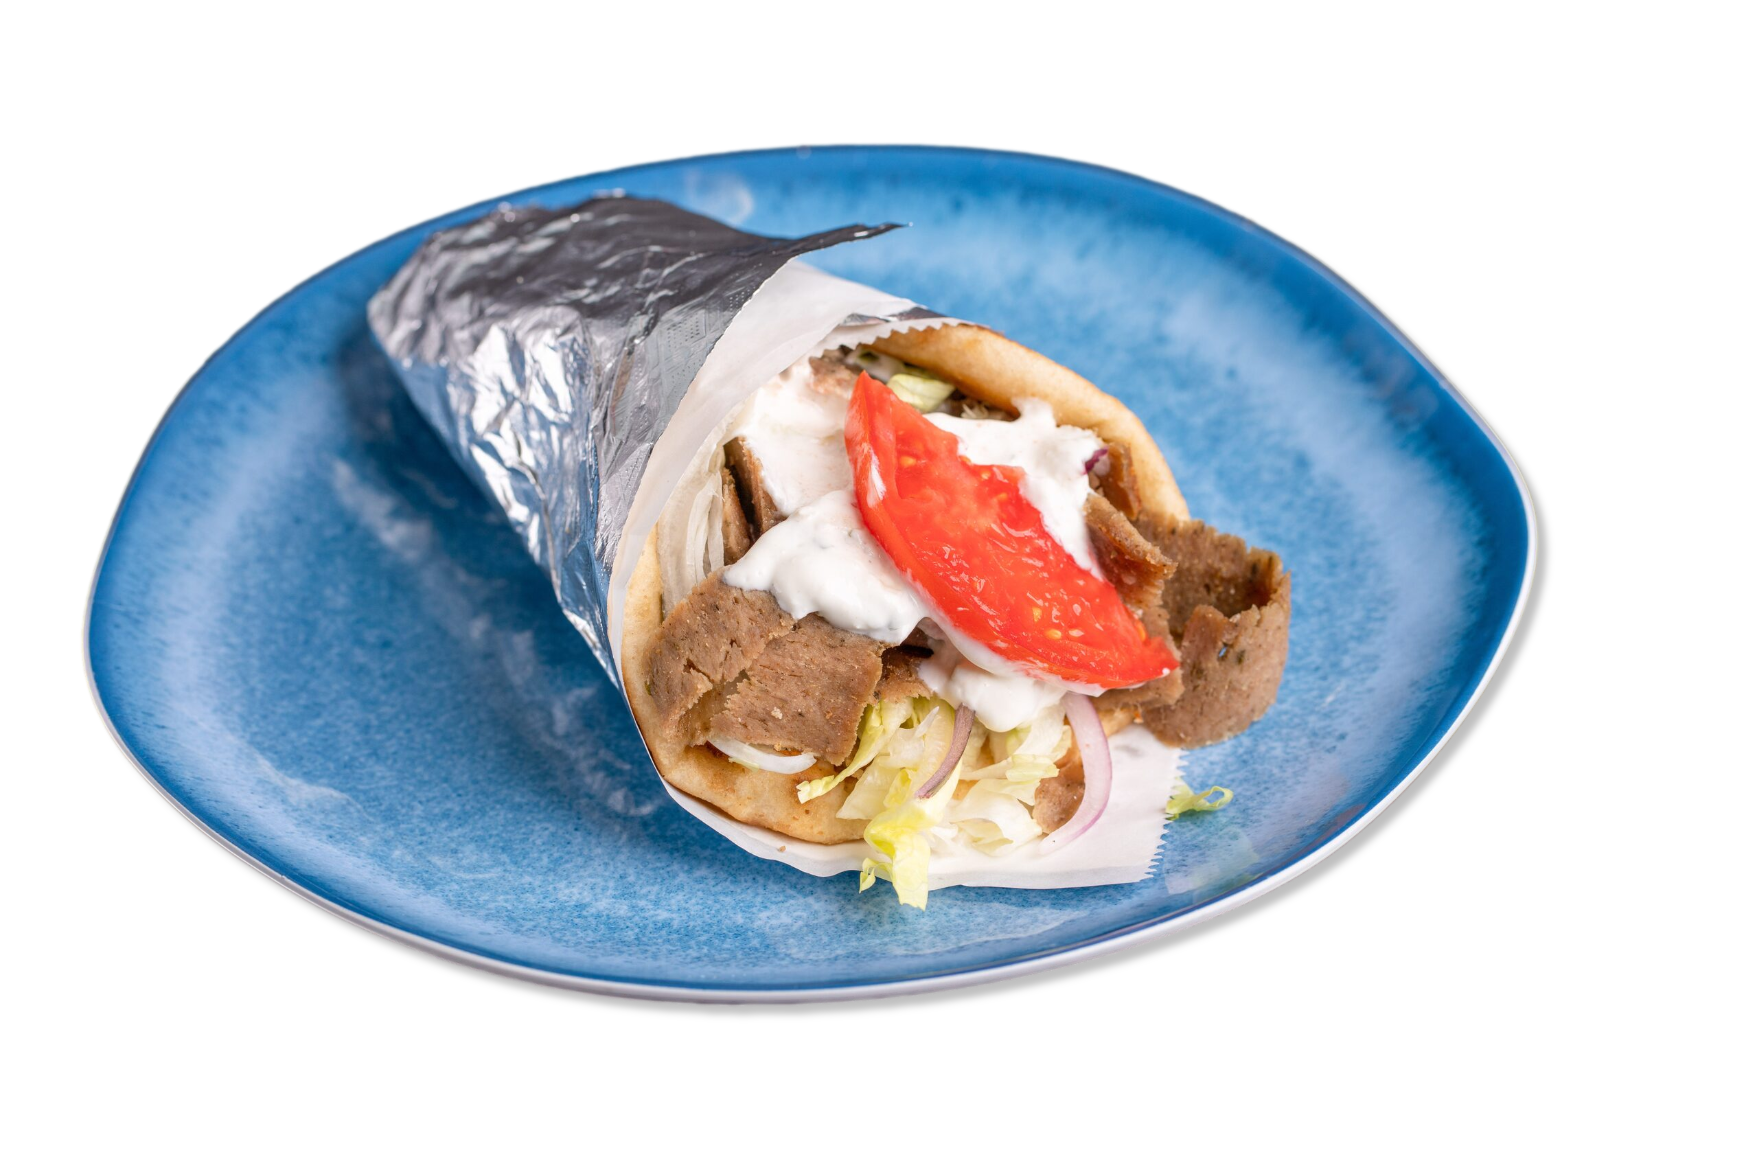 A gyro on a blue plate with a tomato on top